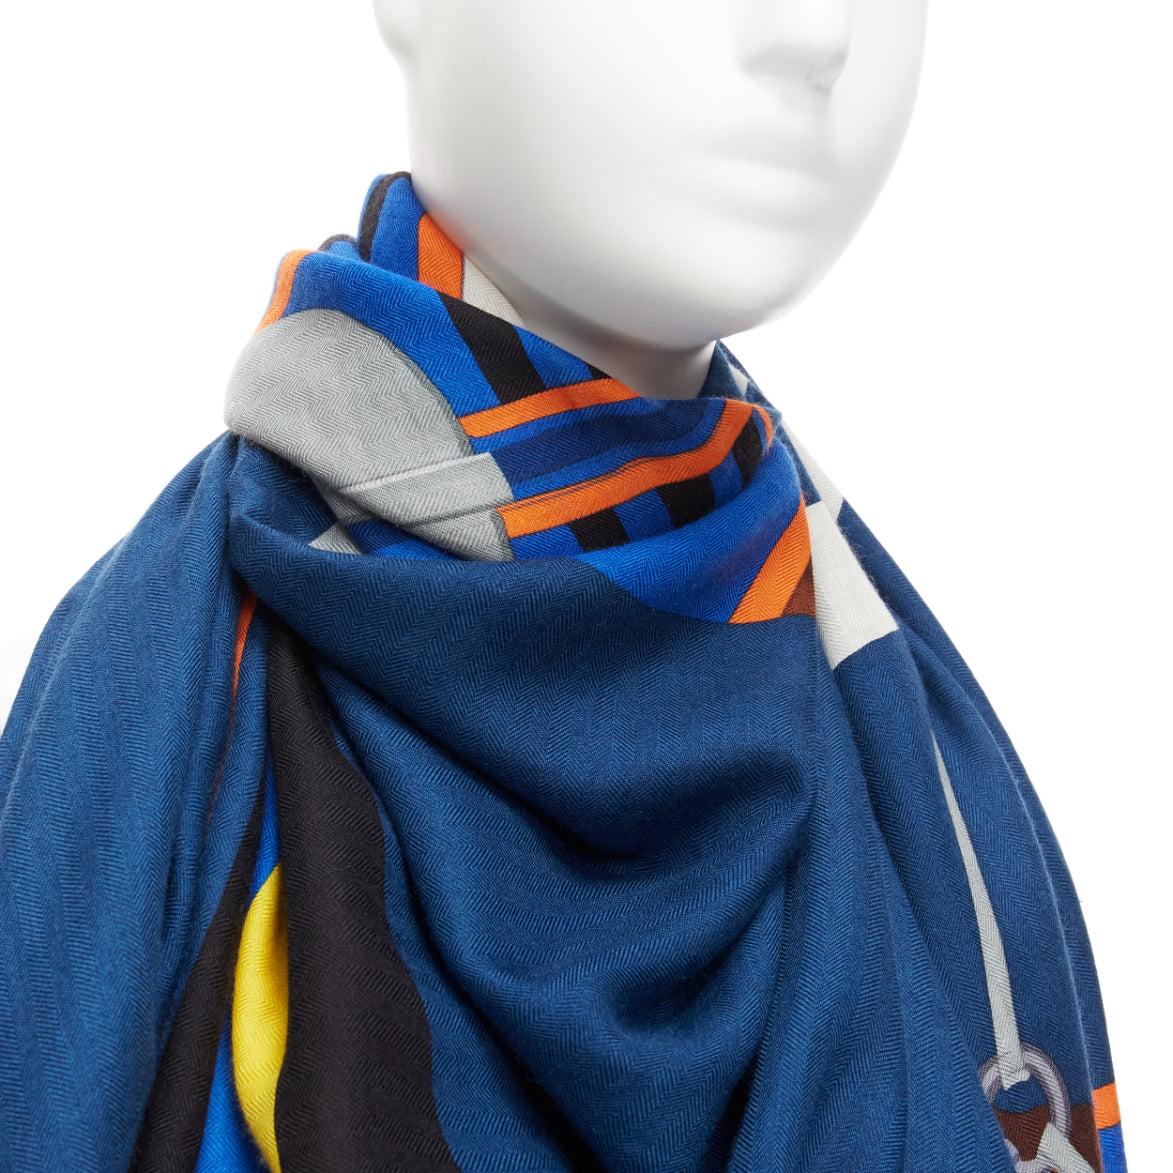 HERMES blue cashmere silk colorblock equestrian horse 135cm square scarf
Reference: AAWC/A01154
Brand: Hermes
Material: Cashmere, Silk
Color: Blue, Multicolour
Pattern: Solid
Extra Details: Colorblock horse print.
Made in: